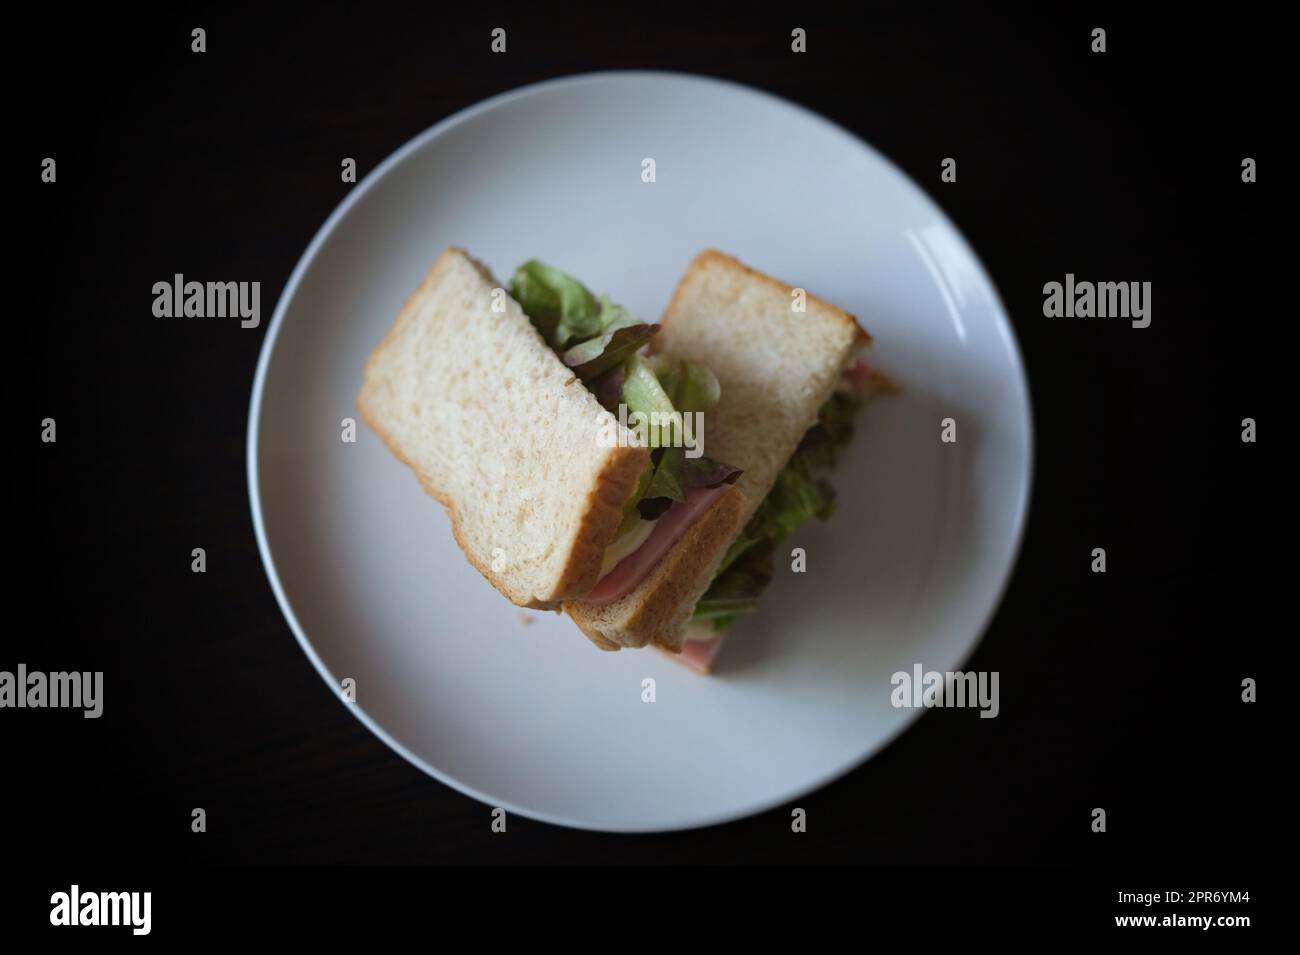 Sandwiches with egg, ham and toast cheese fried in white dish Stock Photo